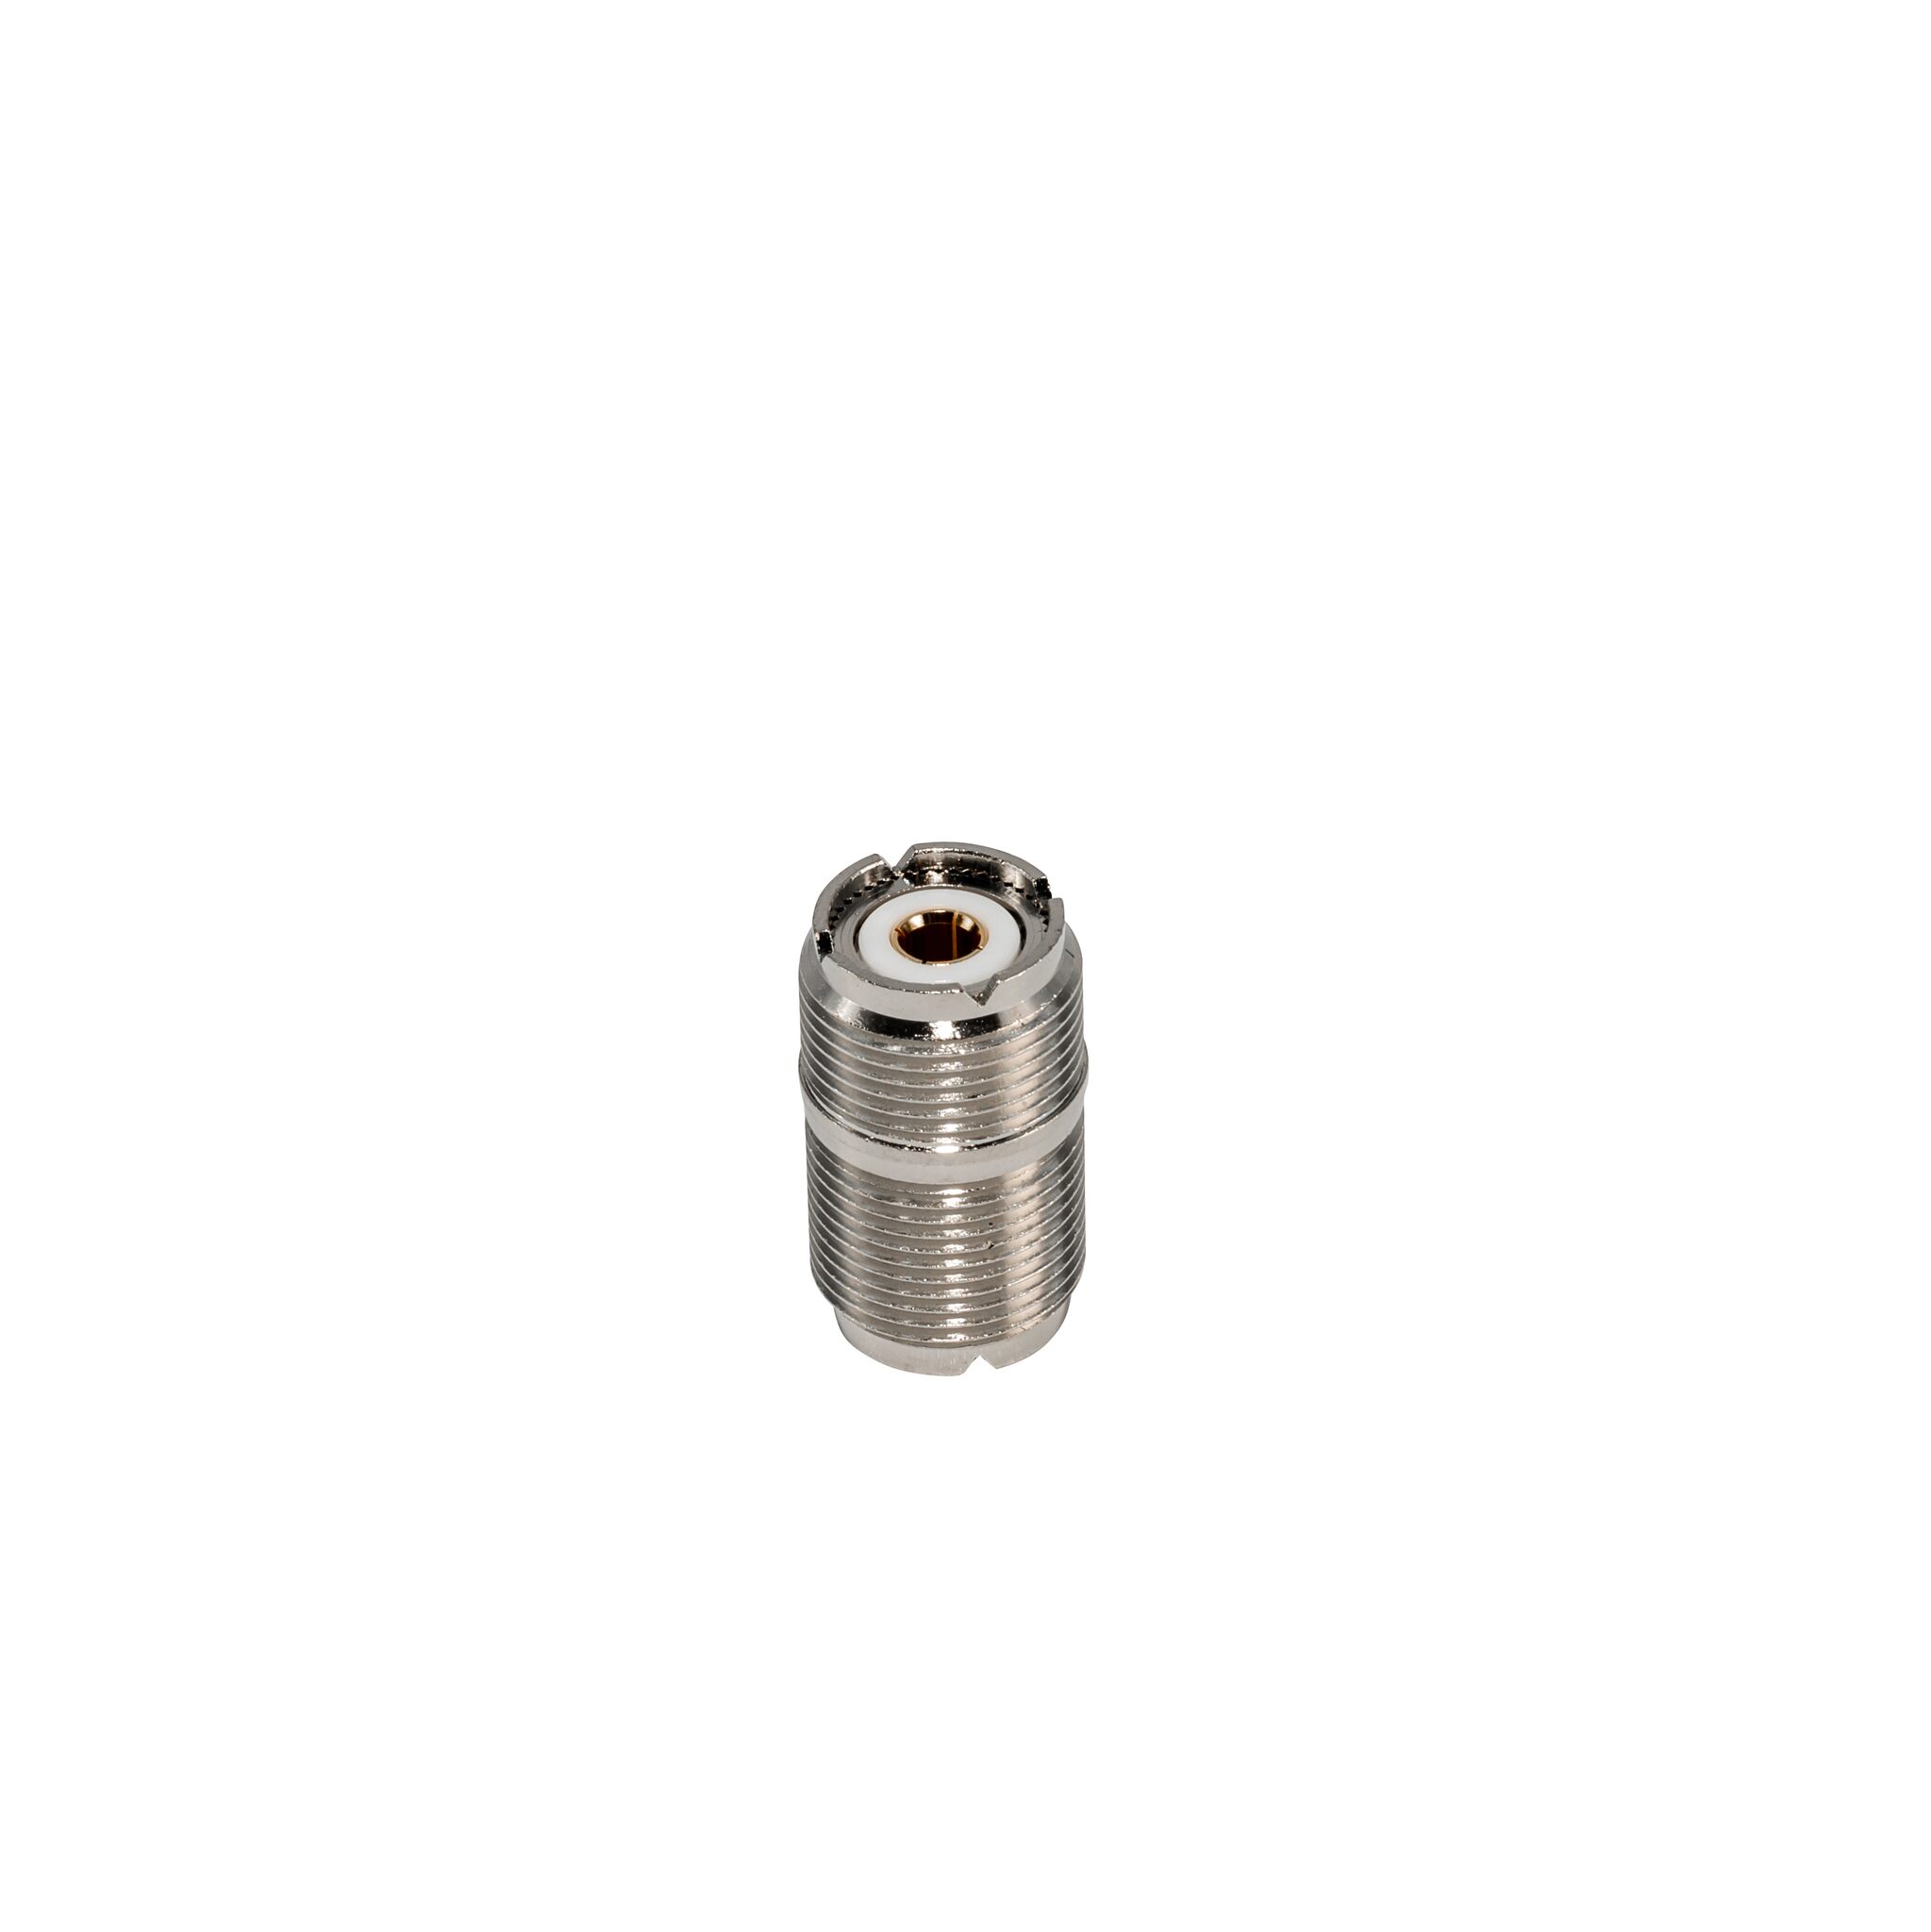 Coupling for antenna connector RG 58